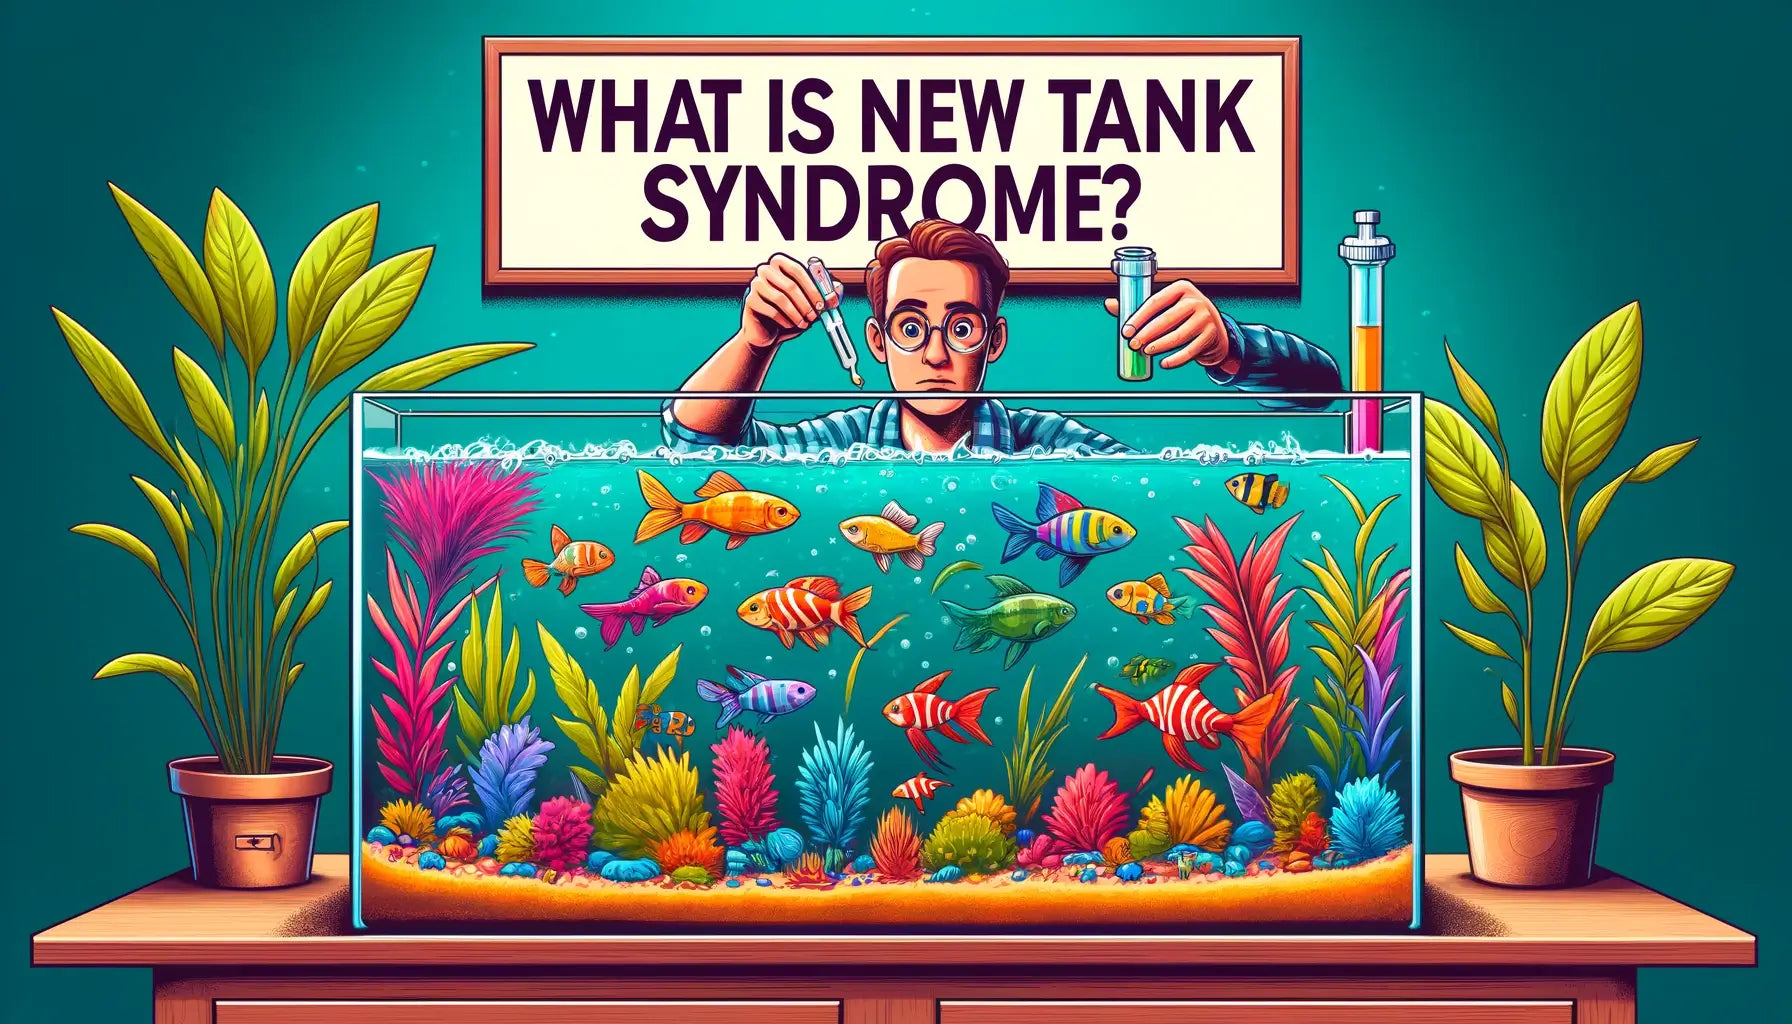 What is new tank syndrome